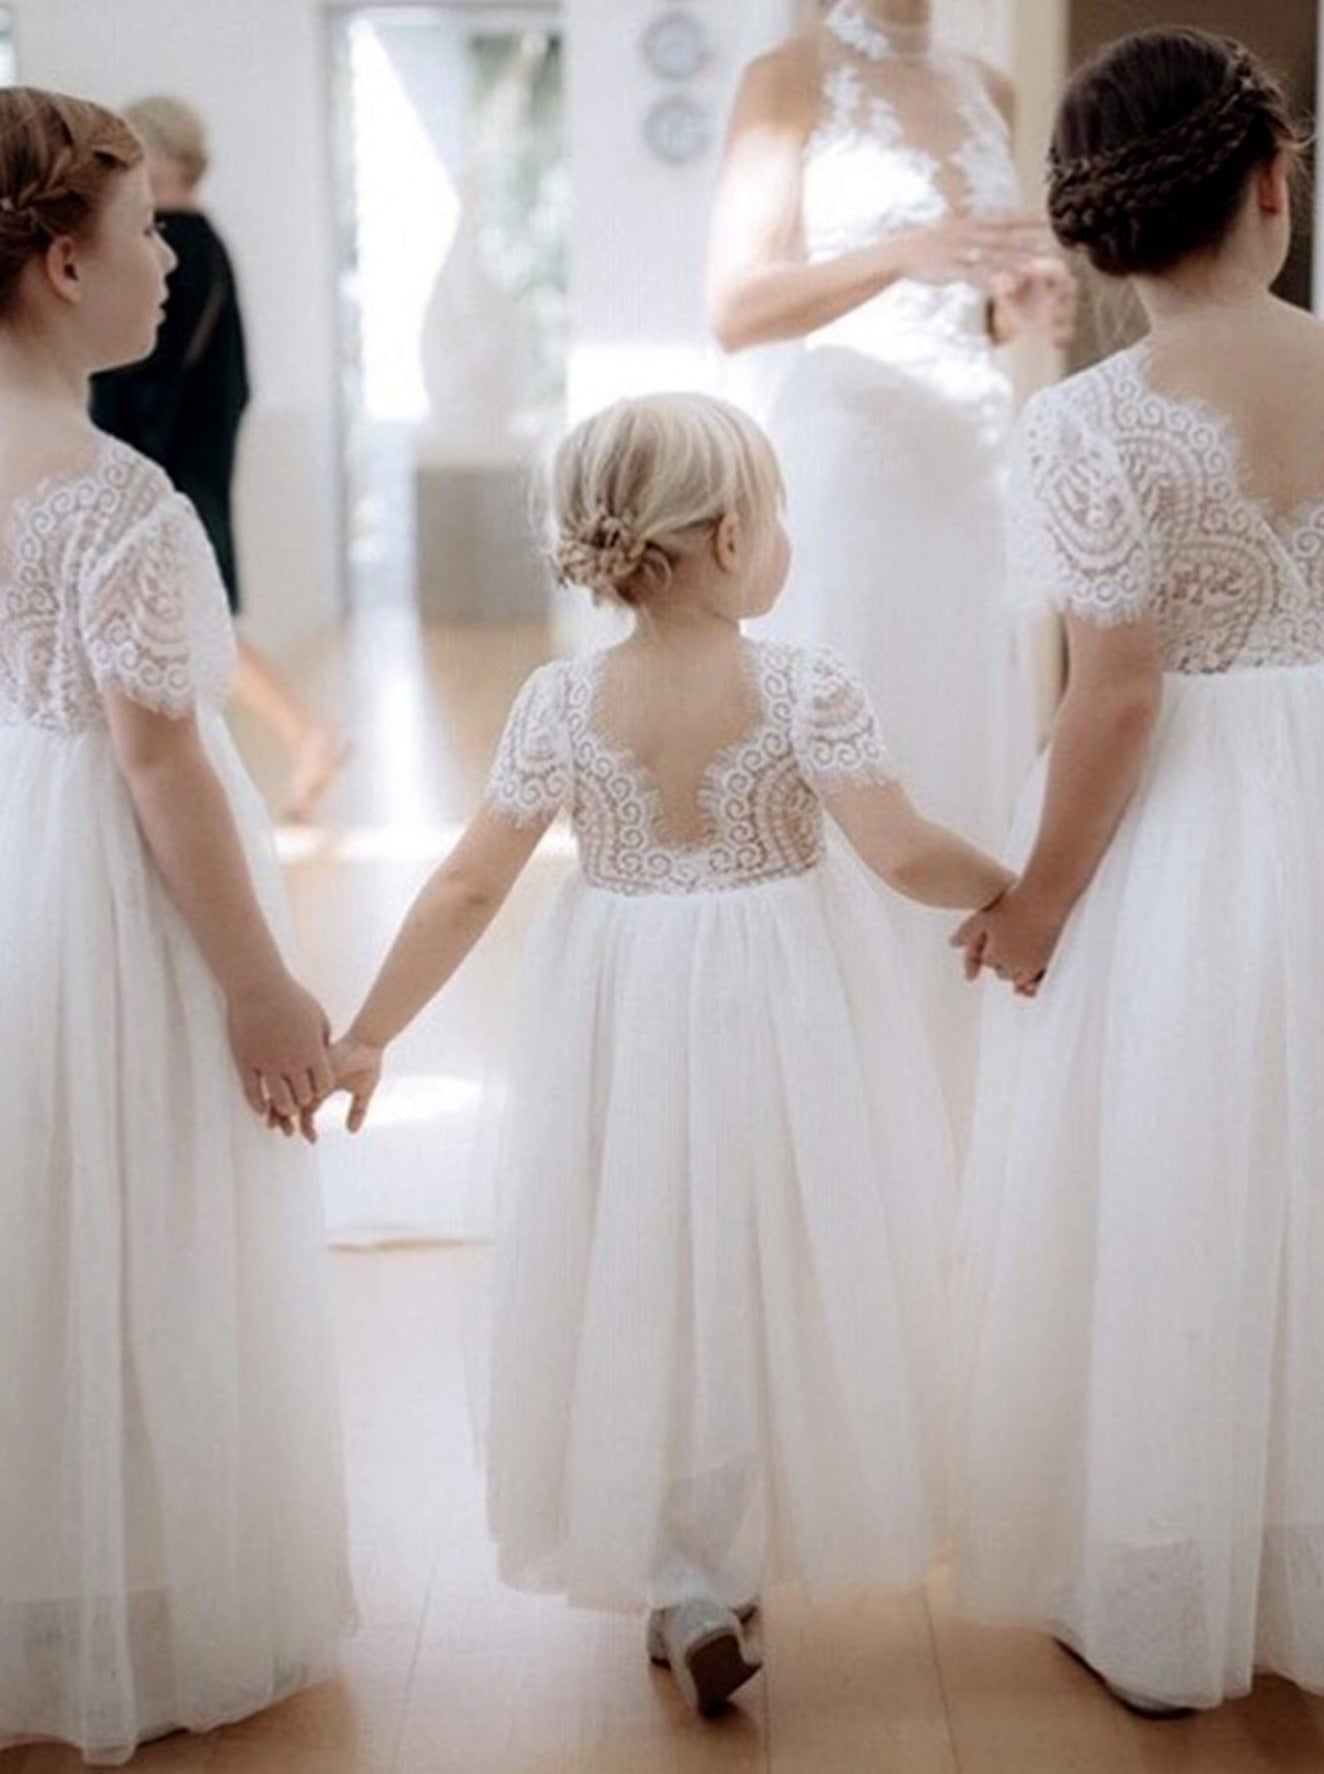 2Bunnies Flower Girl Dress Peony Lace Back A-Line Short Sleeve Straight Tulle Maxi (White) - 2BUNNIES